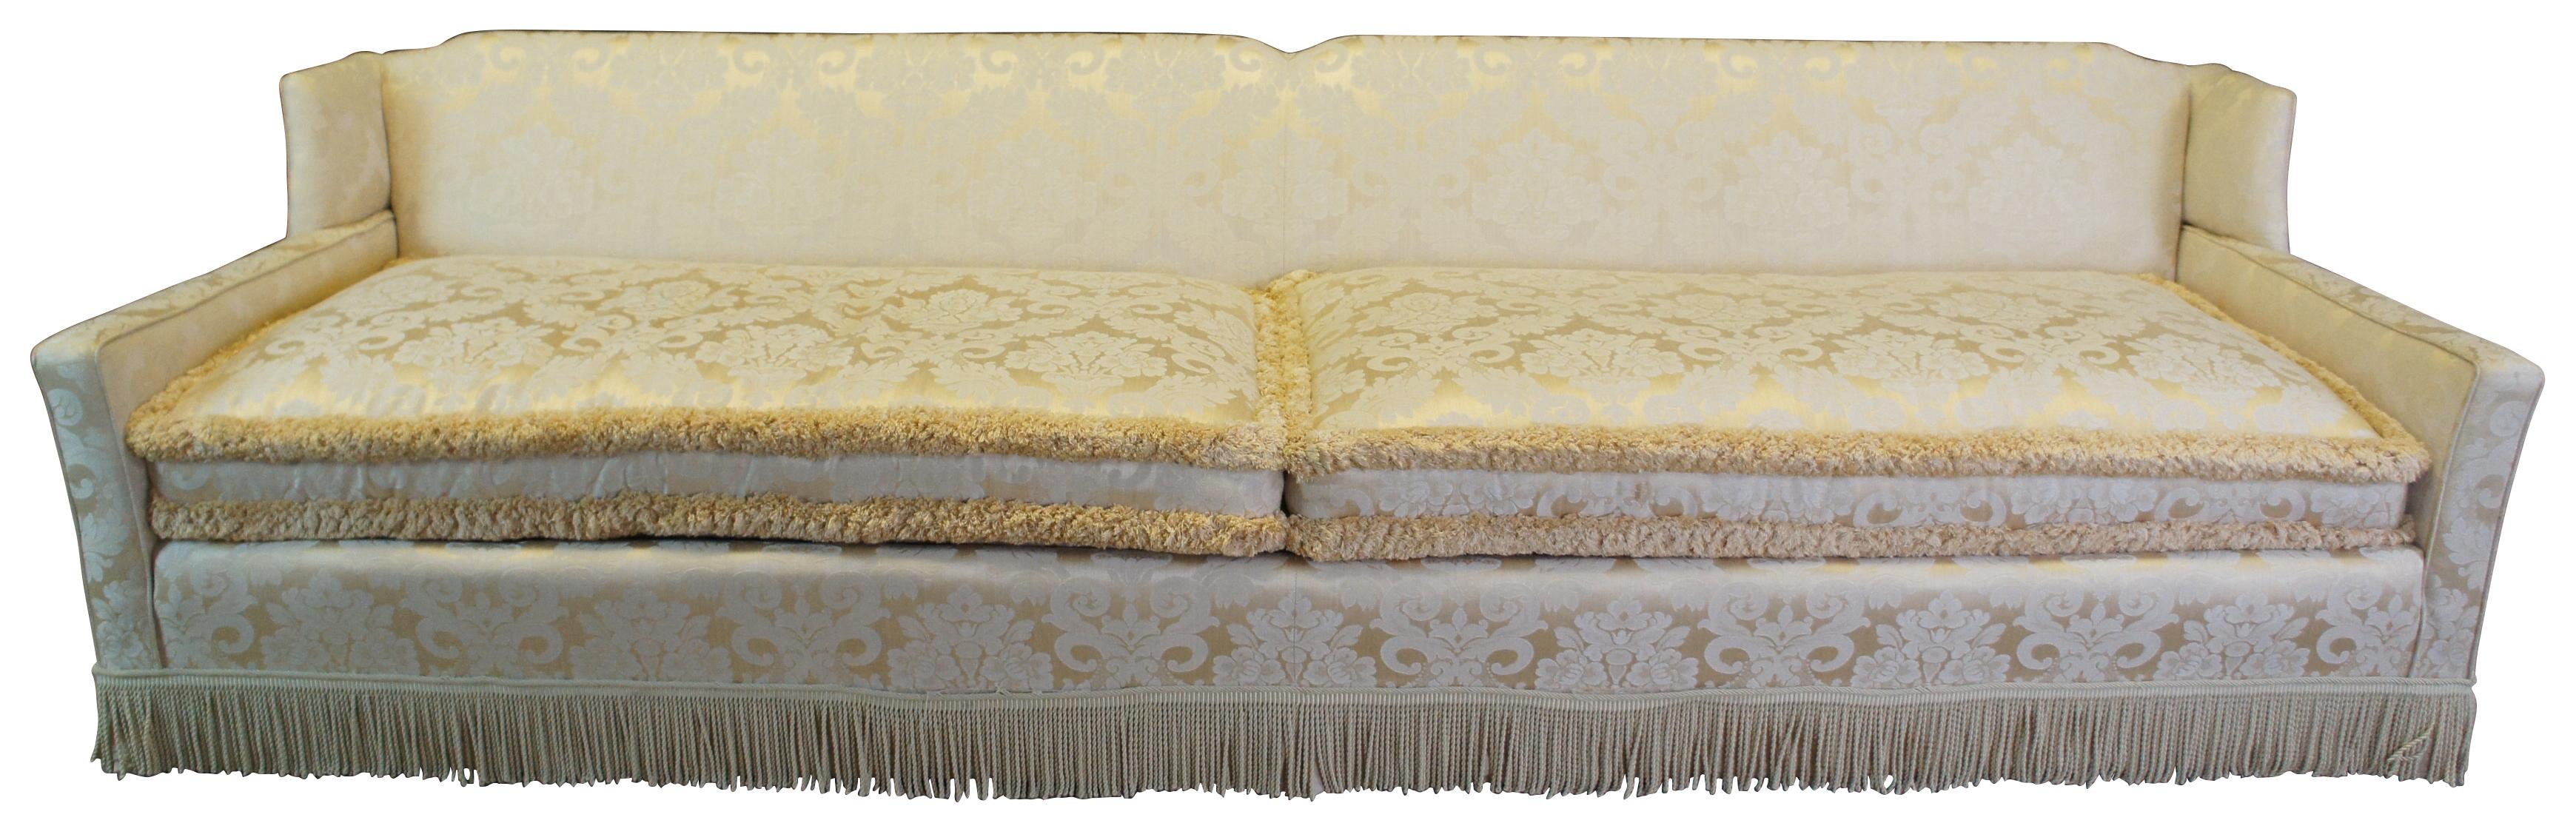 Stunning mid century track arm sofa. A rectangular frame upholstered in an old world off-white silk brocade fabric. Features large downfilled cushions, a 